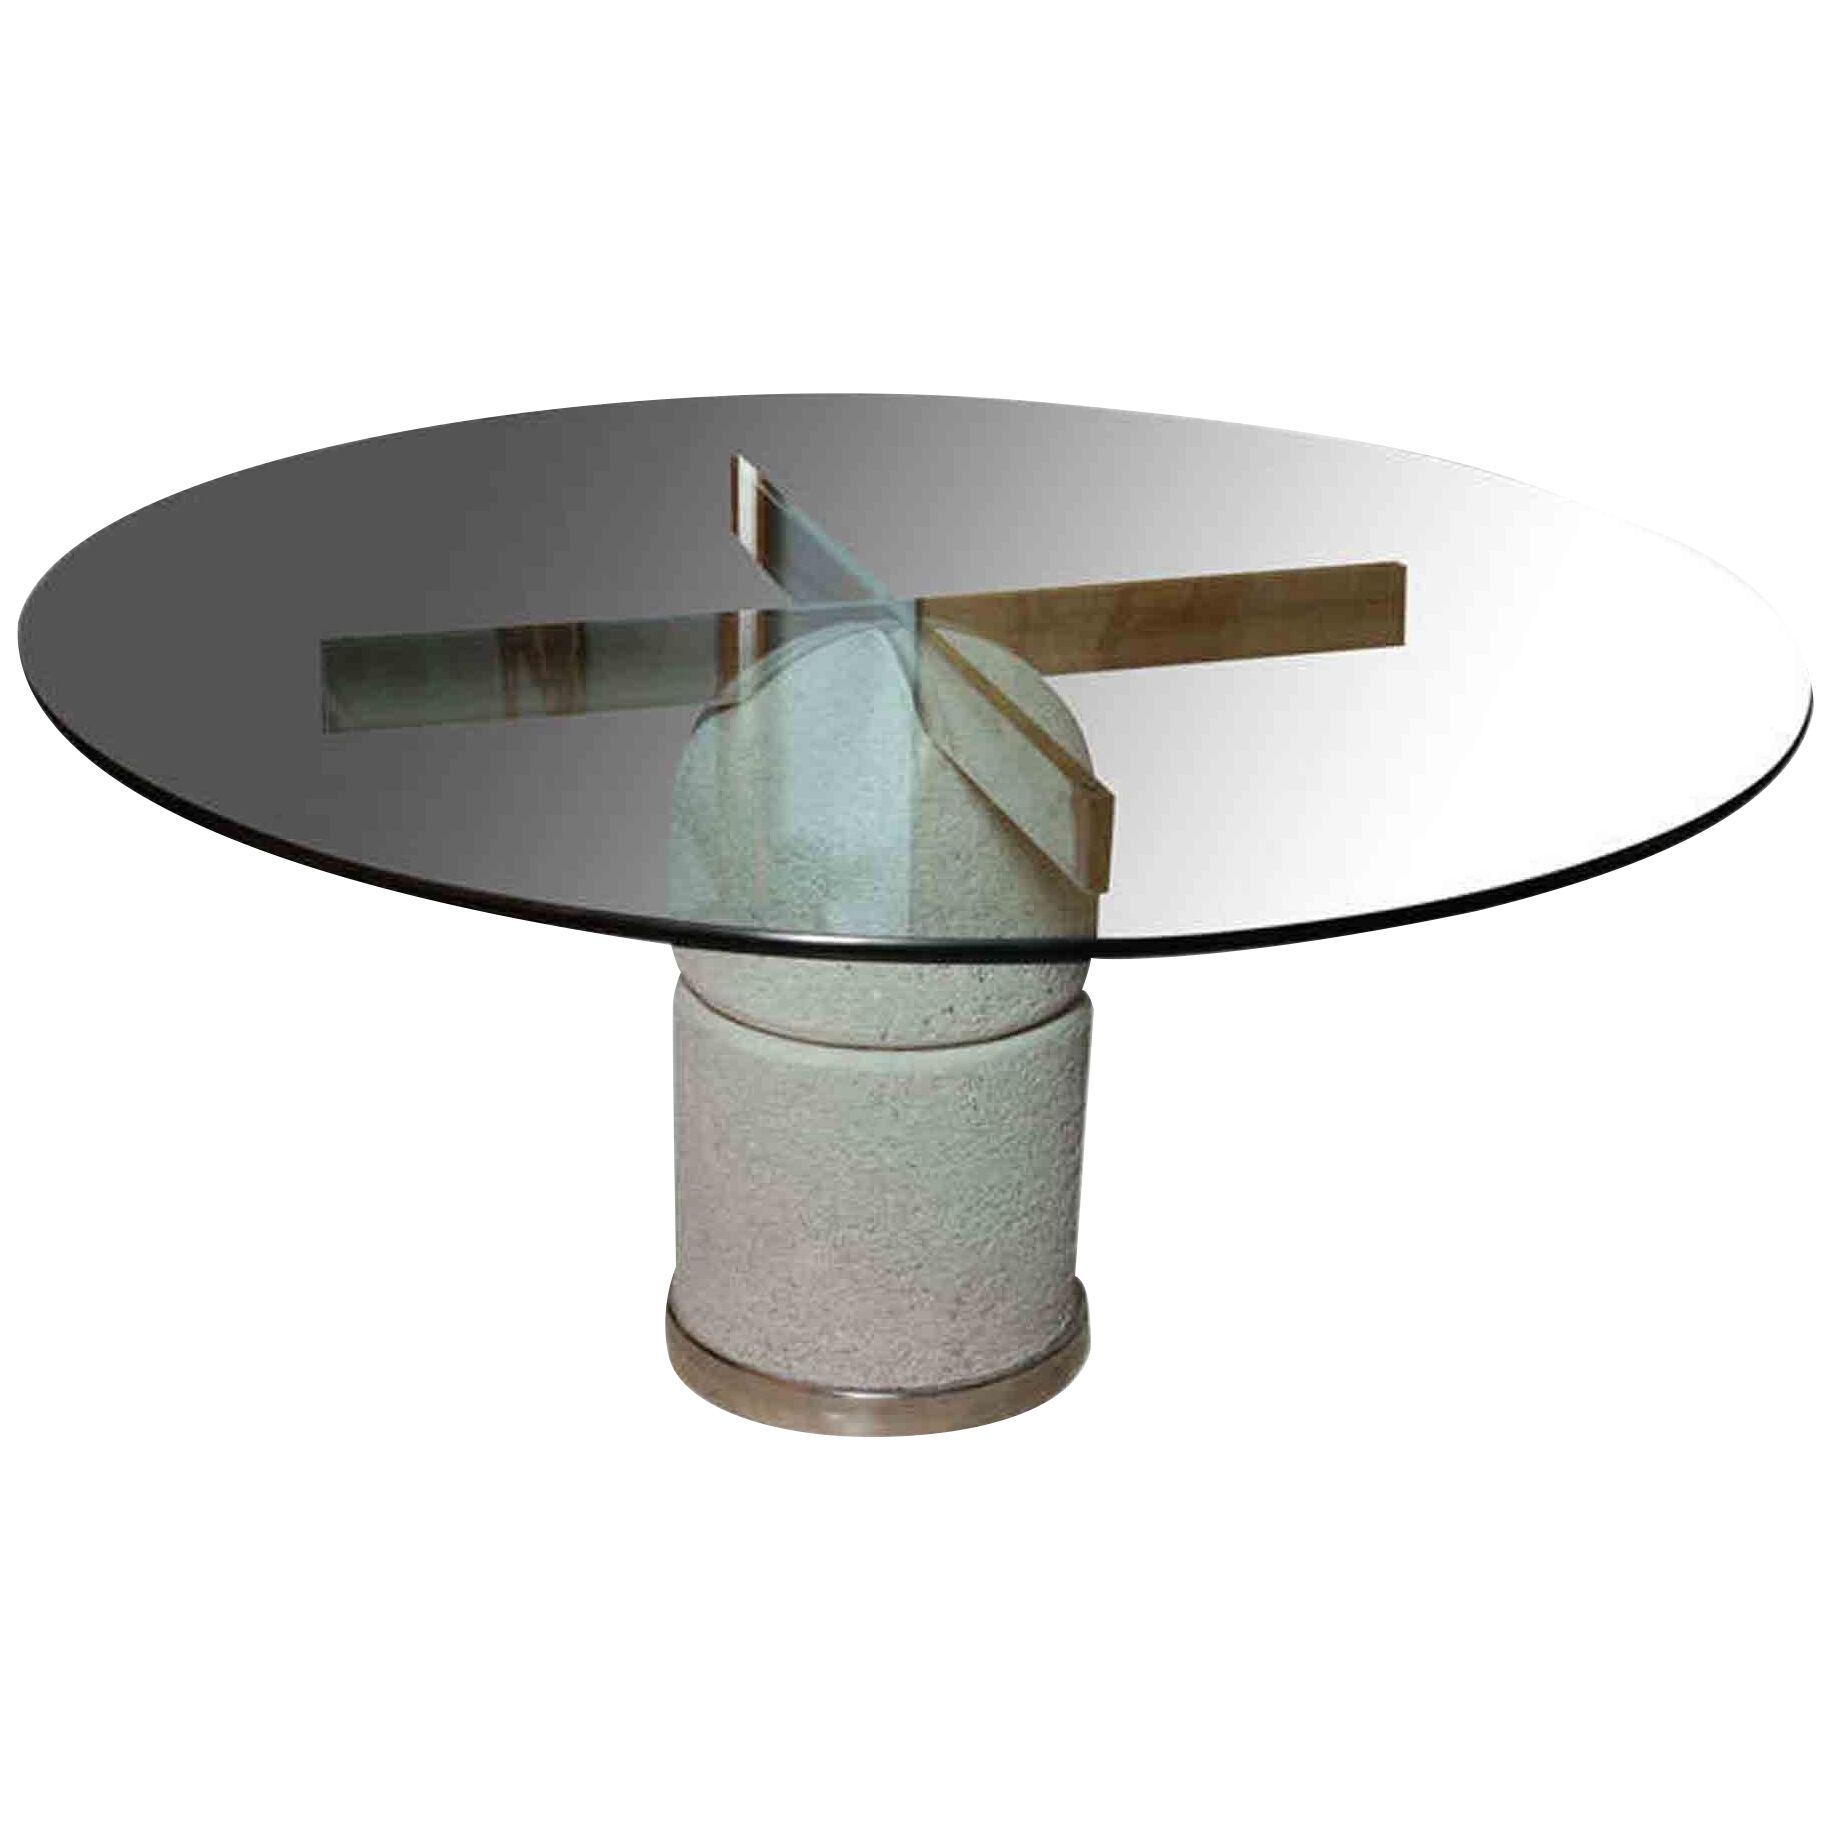 A Glass Chrome and Stone Dining/Center Table, Giovanni Offredi